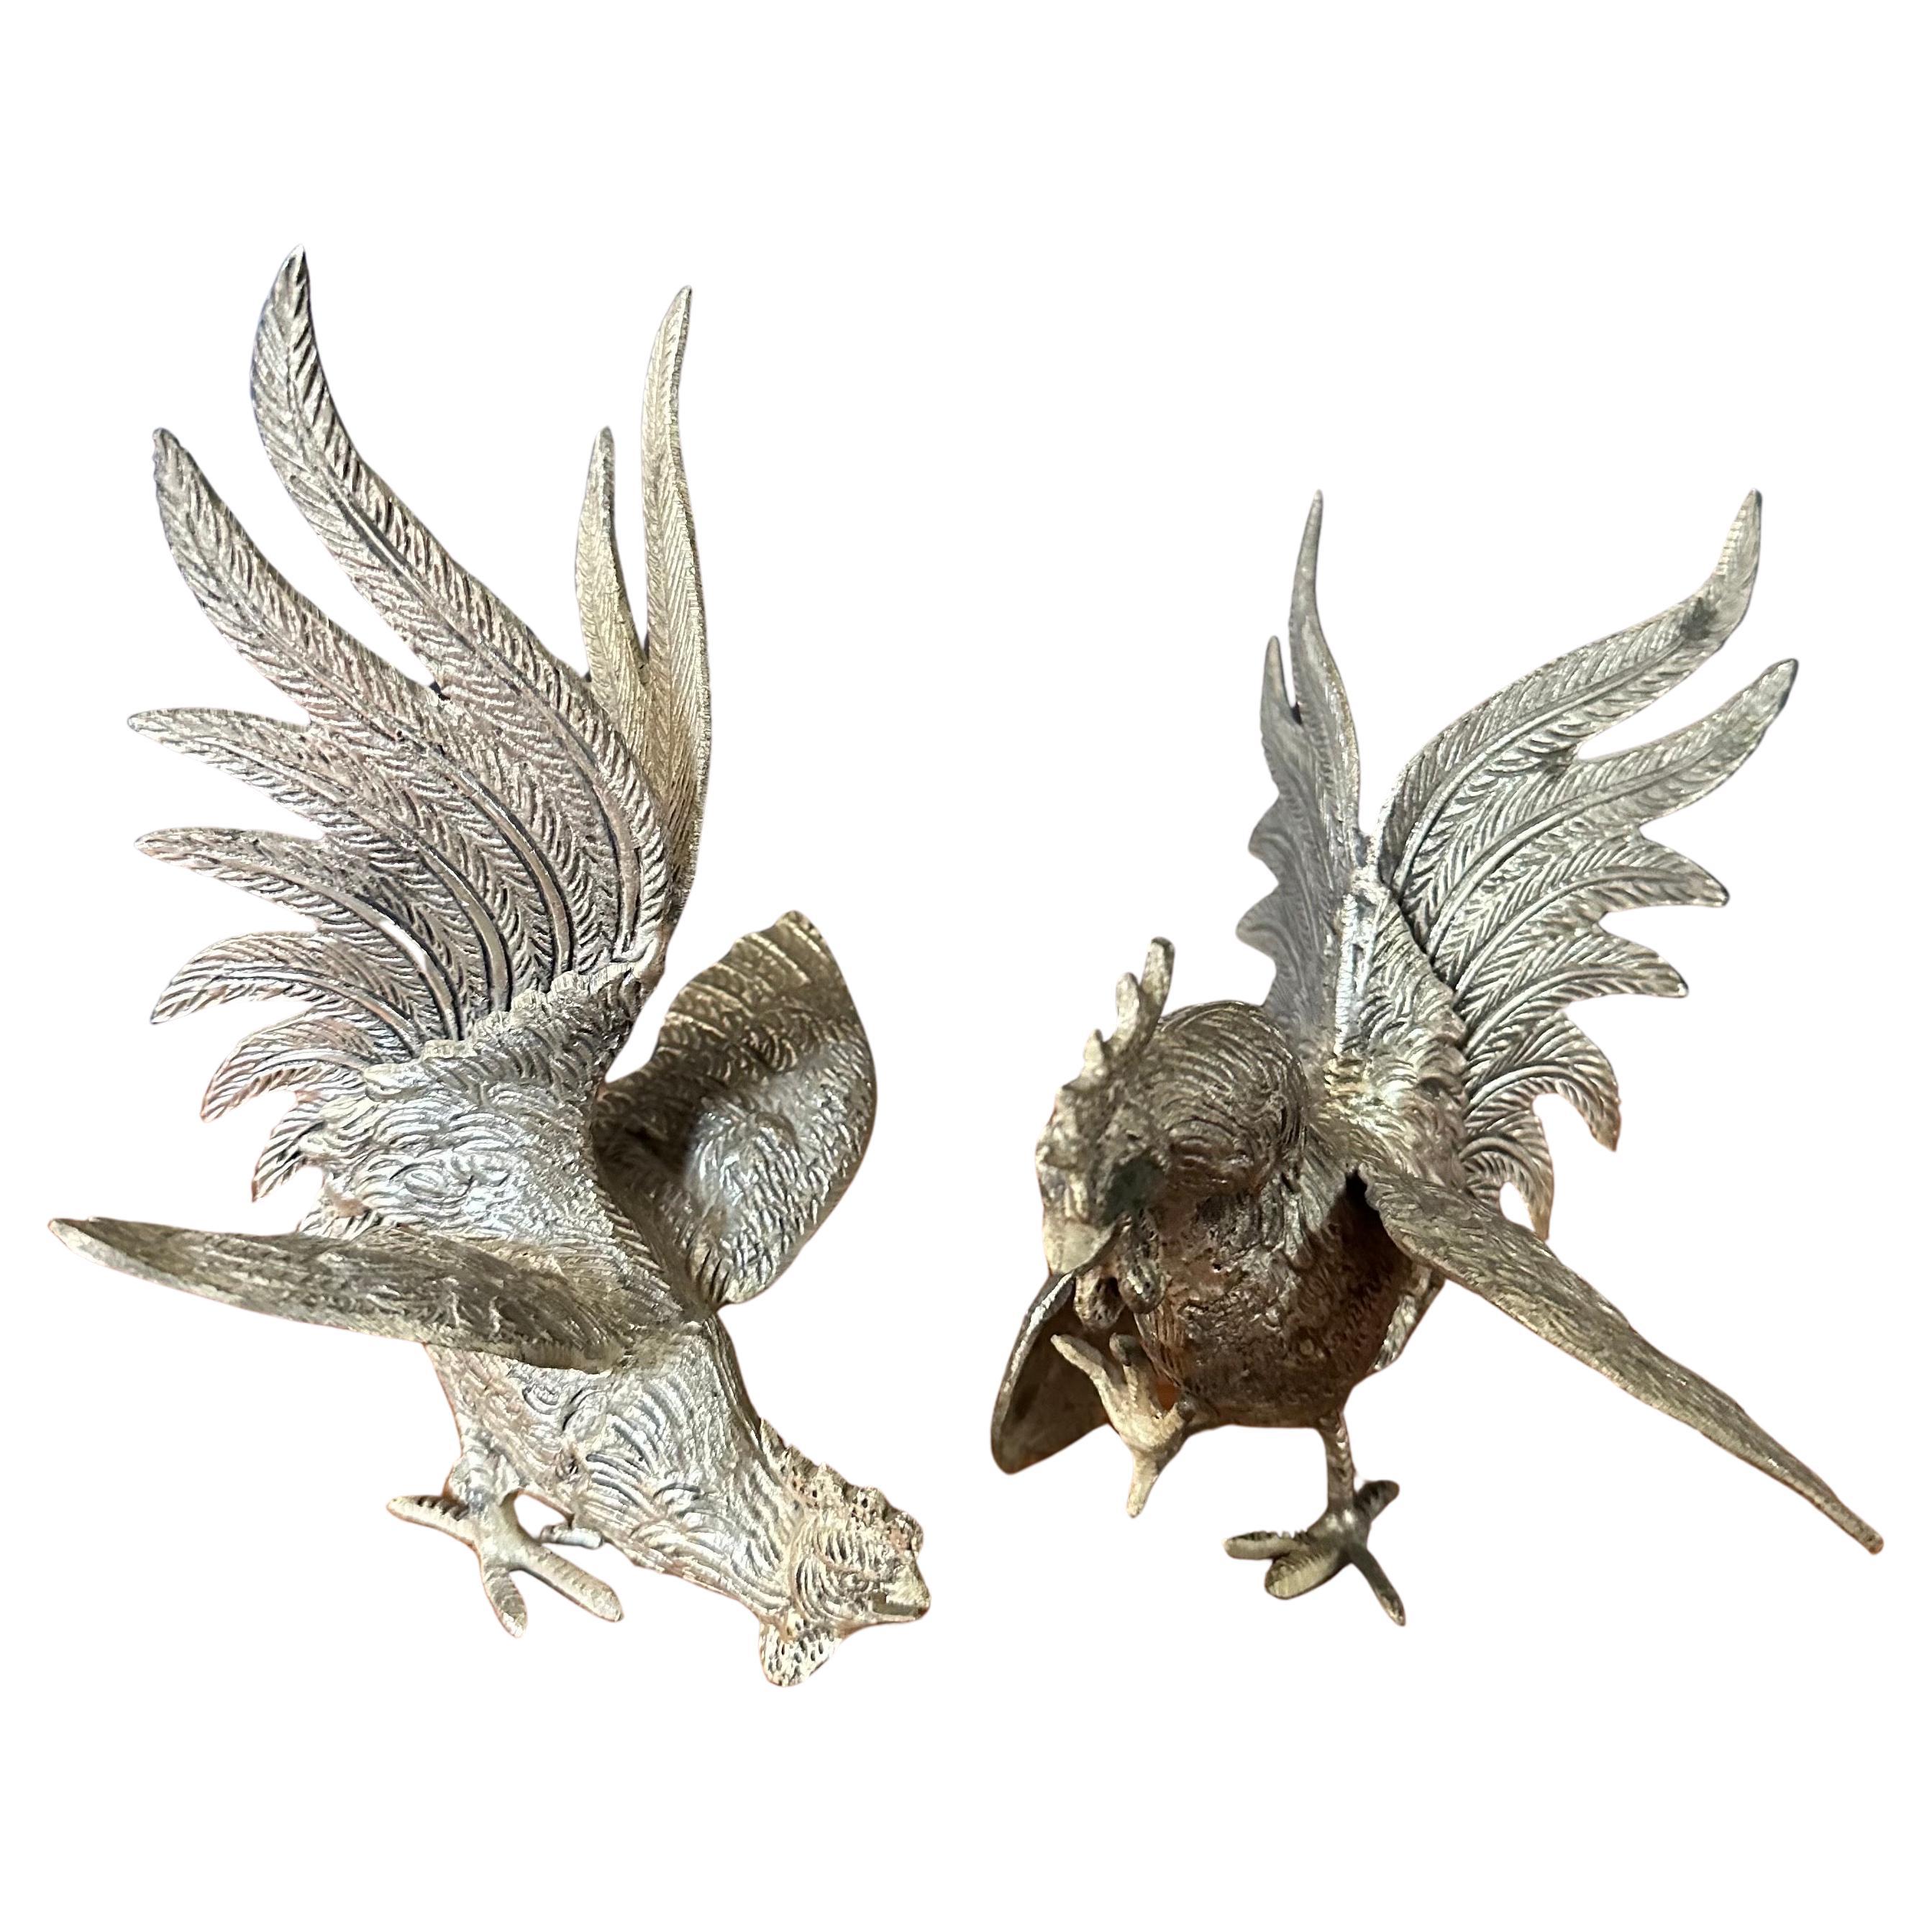 A well made pair of vintage silver plate fighting cock / rooster sculptures, circa 1970s.  The set is in very good vintage condition with a nice patina and measures 10